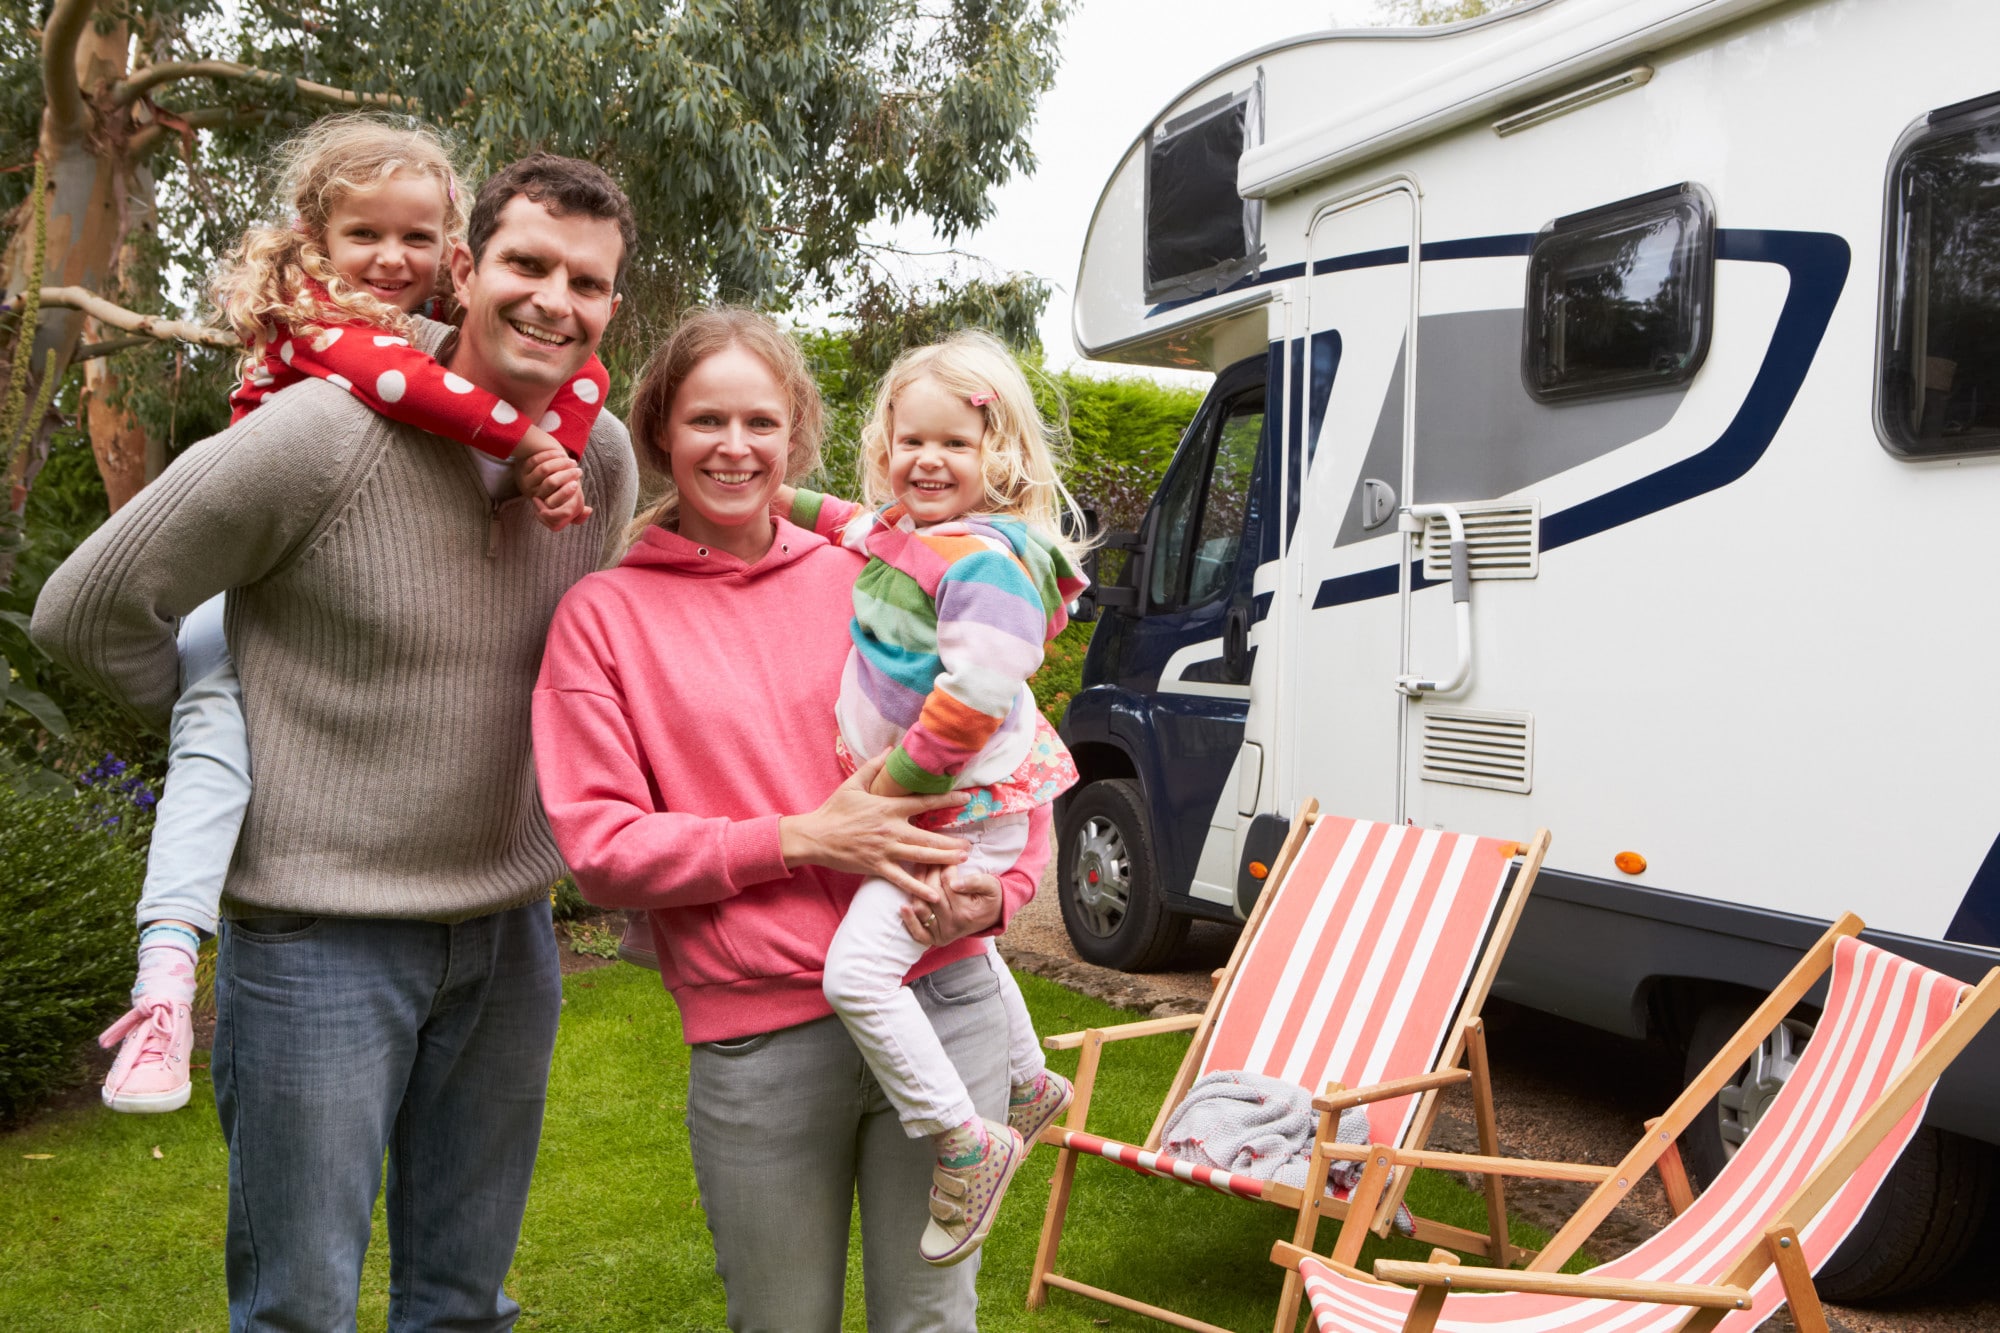 What Are the Best Tips for Living in an RV?